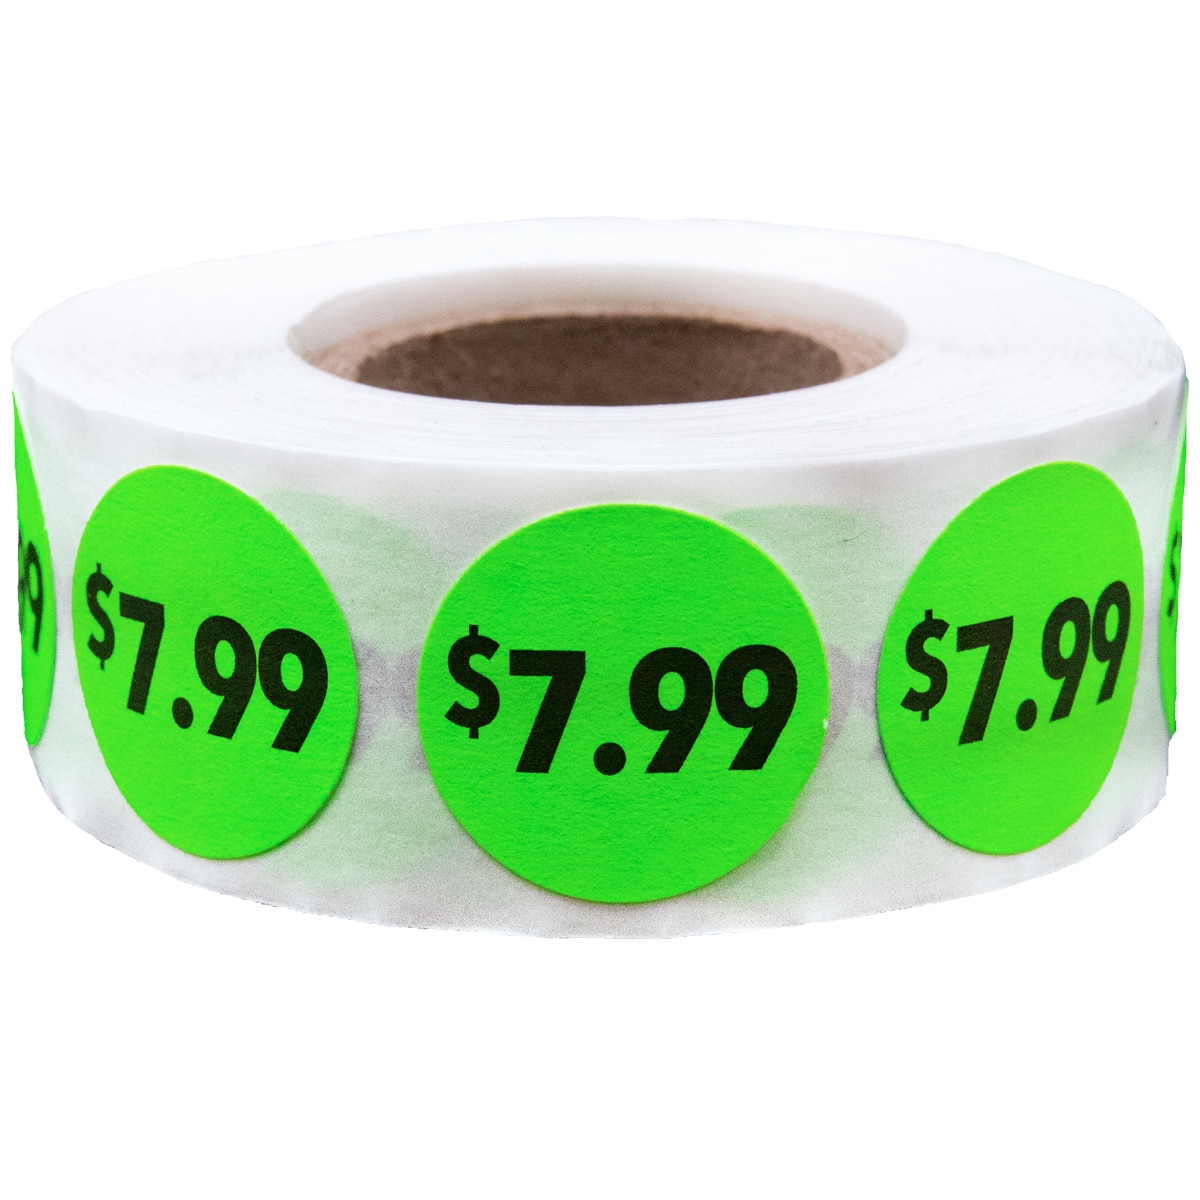  Reduced for Quick Sale Now for Retail Price Tag Stickers - 1.65  x 1.15 Inch Custom Writable Label Pricing Stickers - Pressure Sensitive  Adhesive, Semi-Gloss Coated - 300 Labels/Roll : Tools & Home Improvement